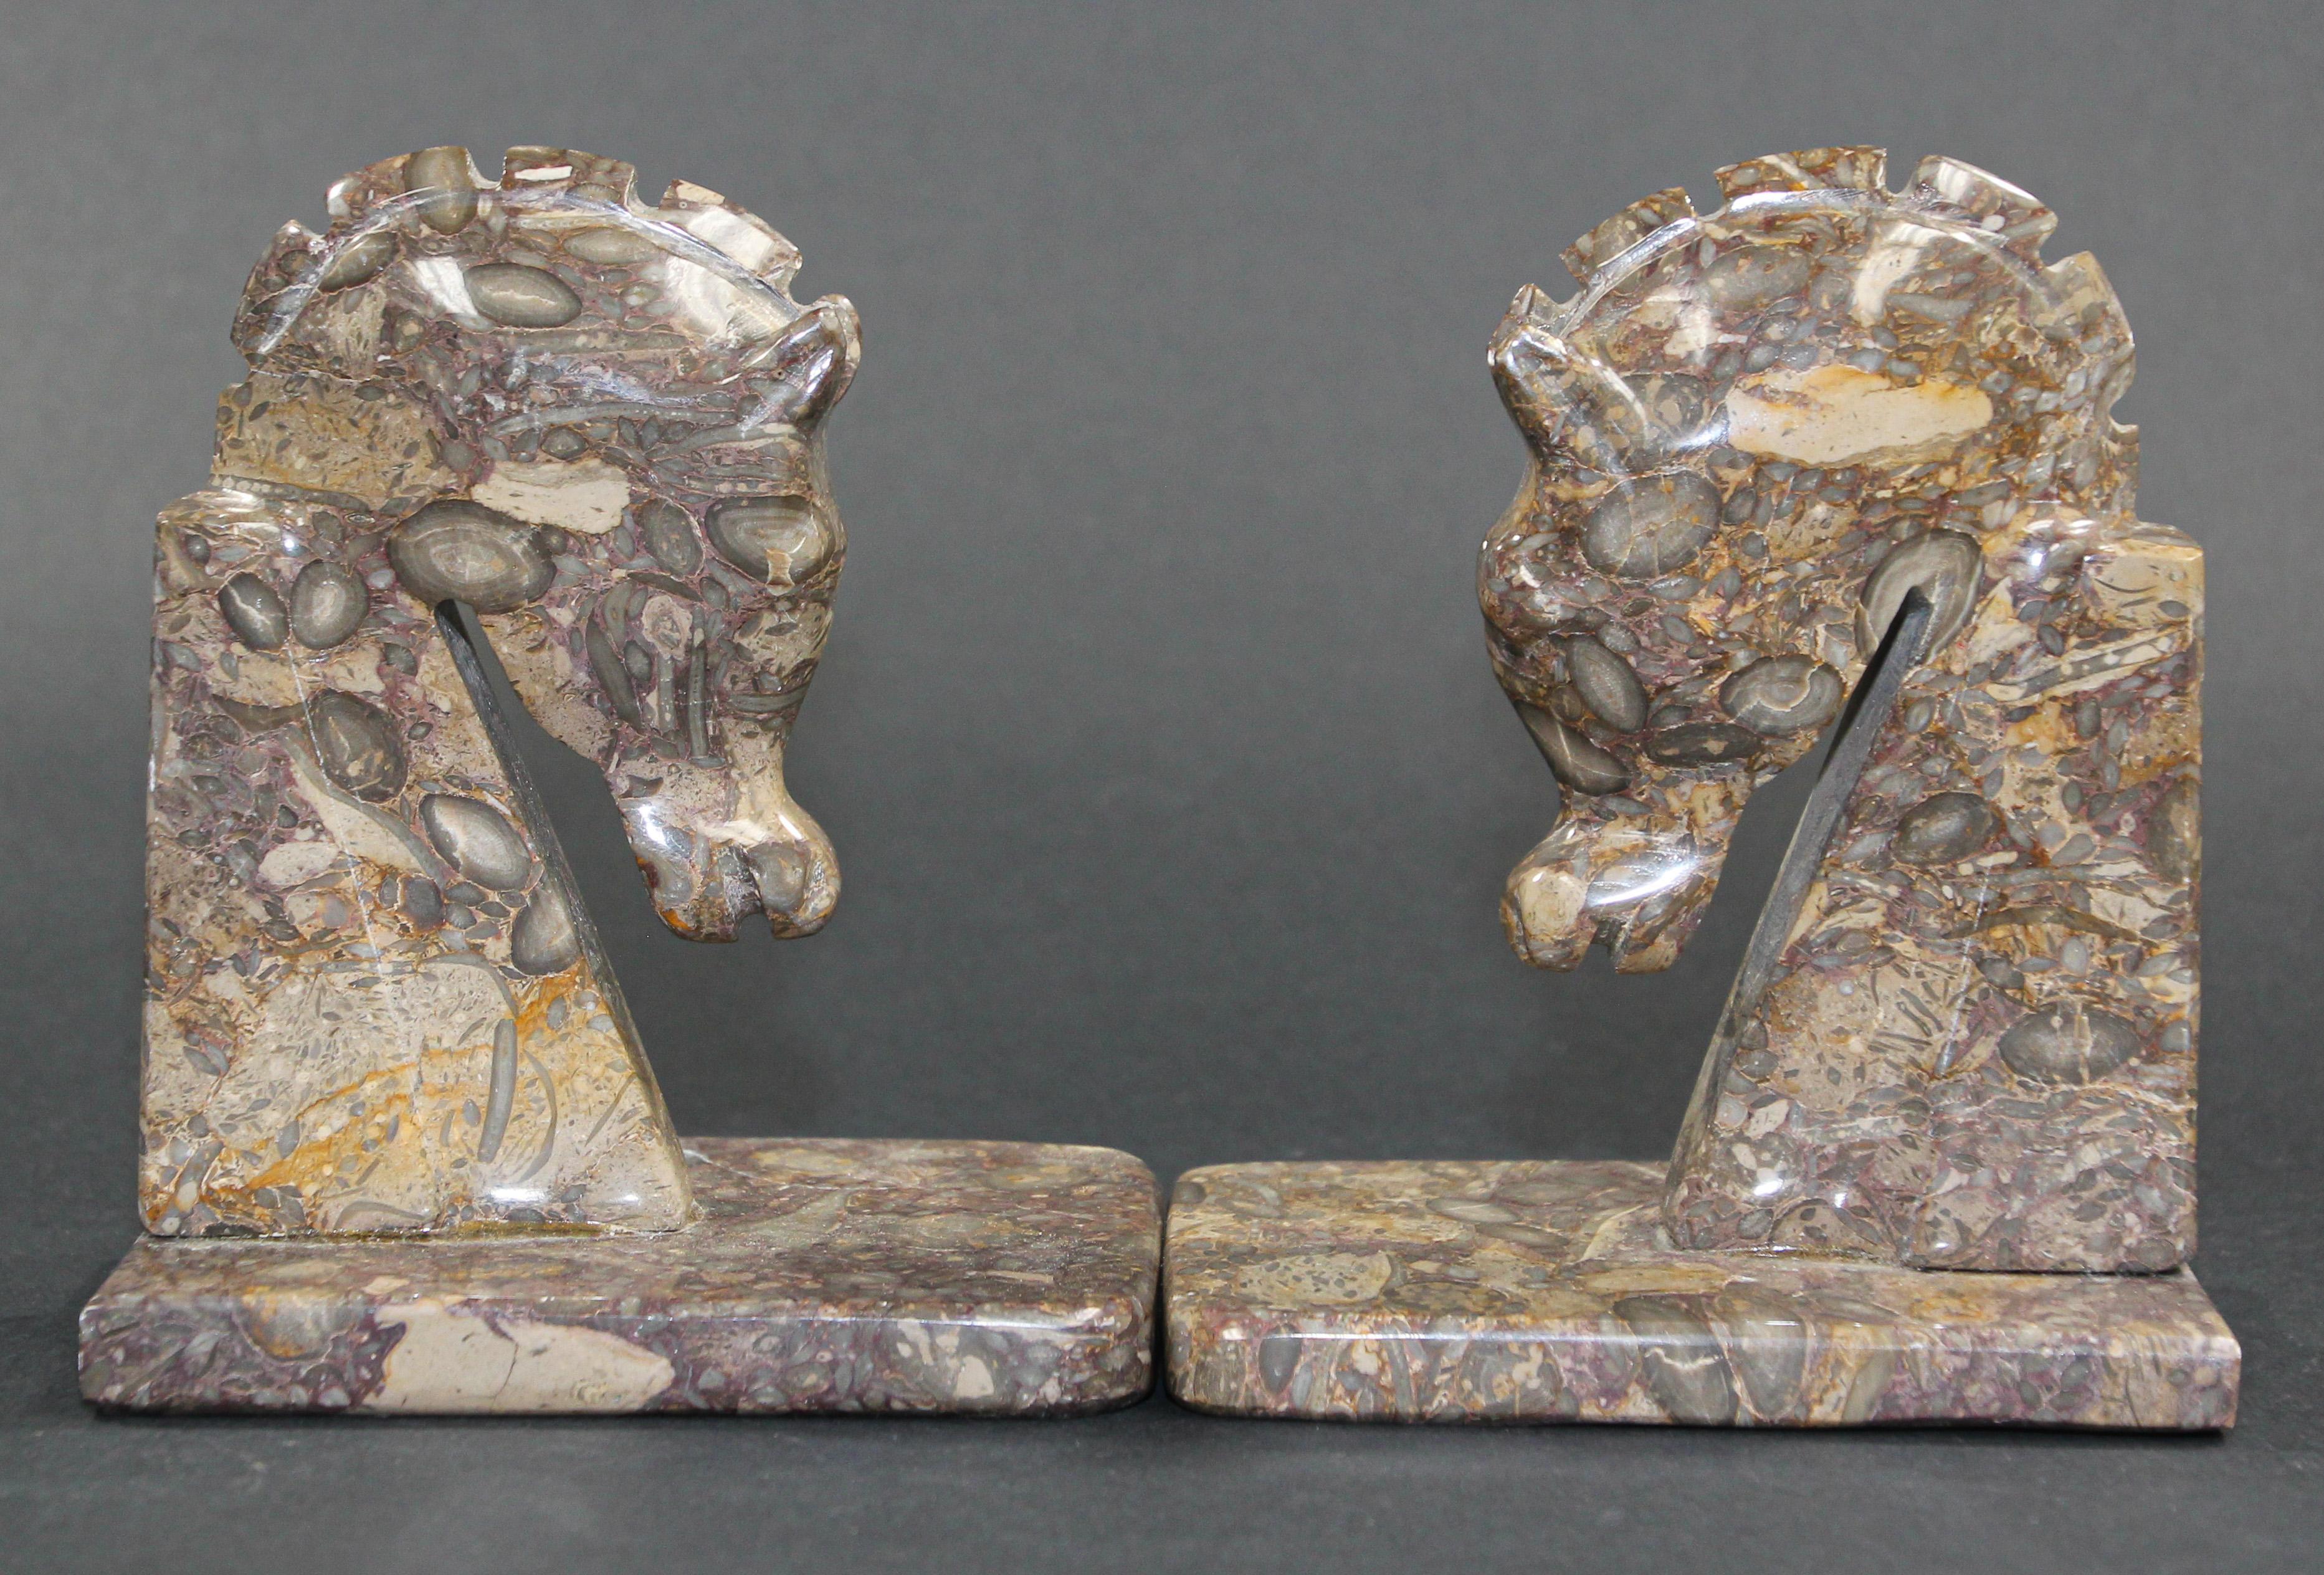 Art Deco Brown Onyx Horses Heads Bookends In Good Condition For Sale In North Hollywood, CA